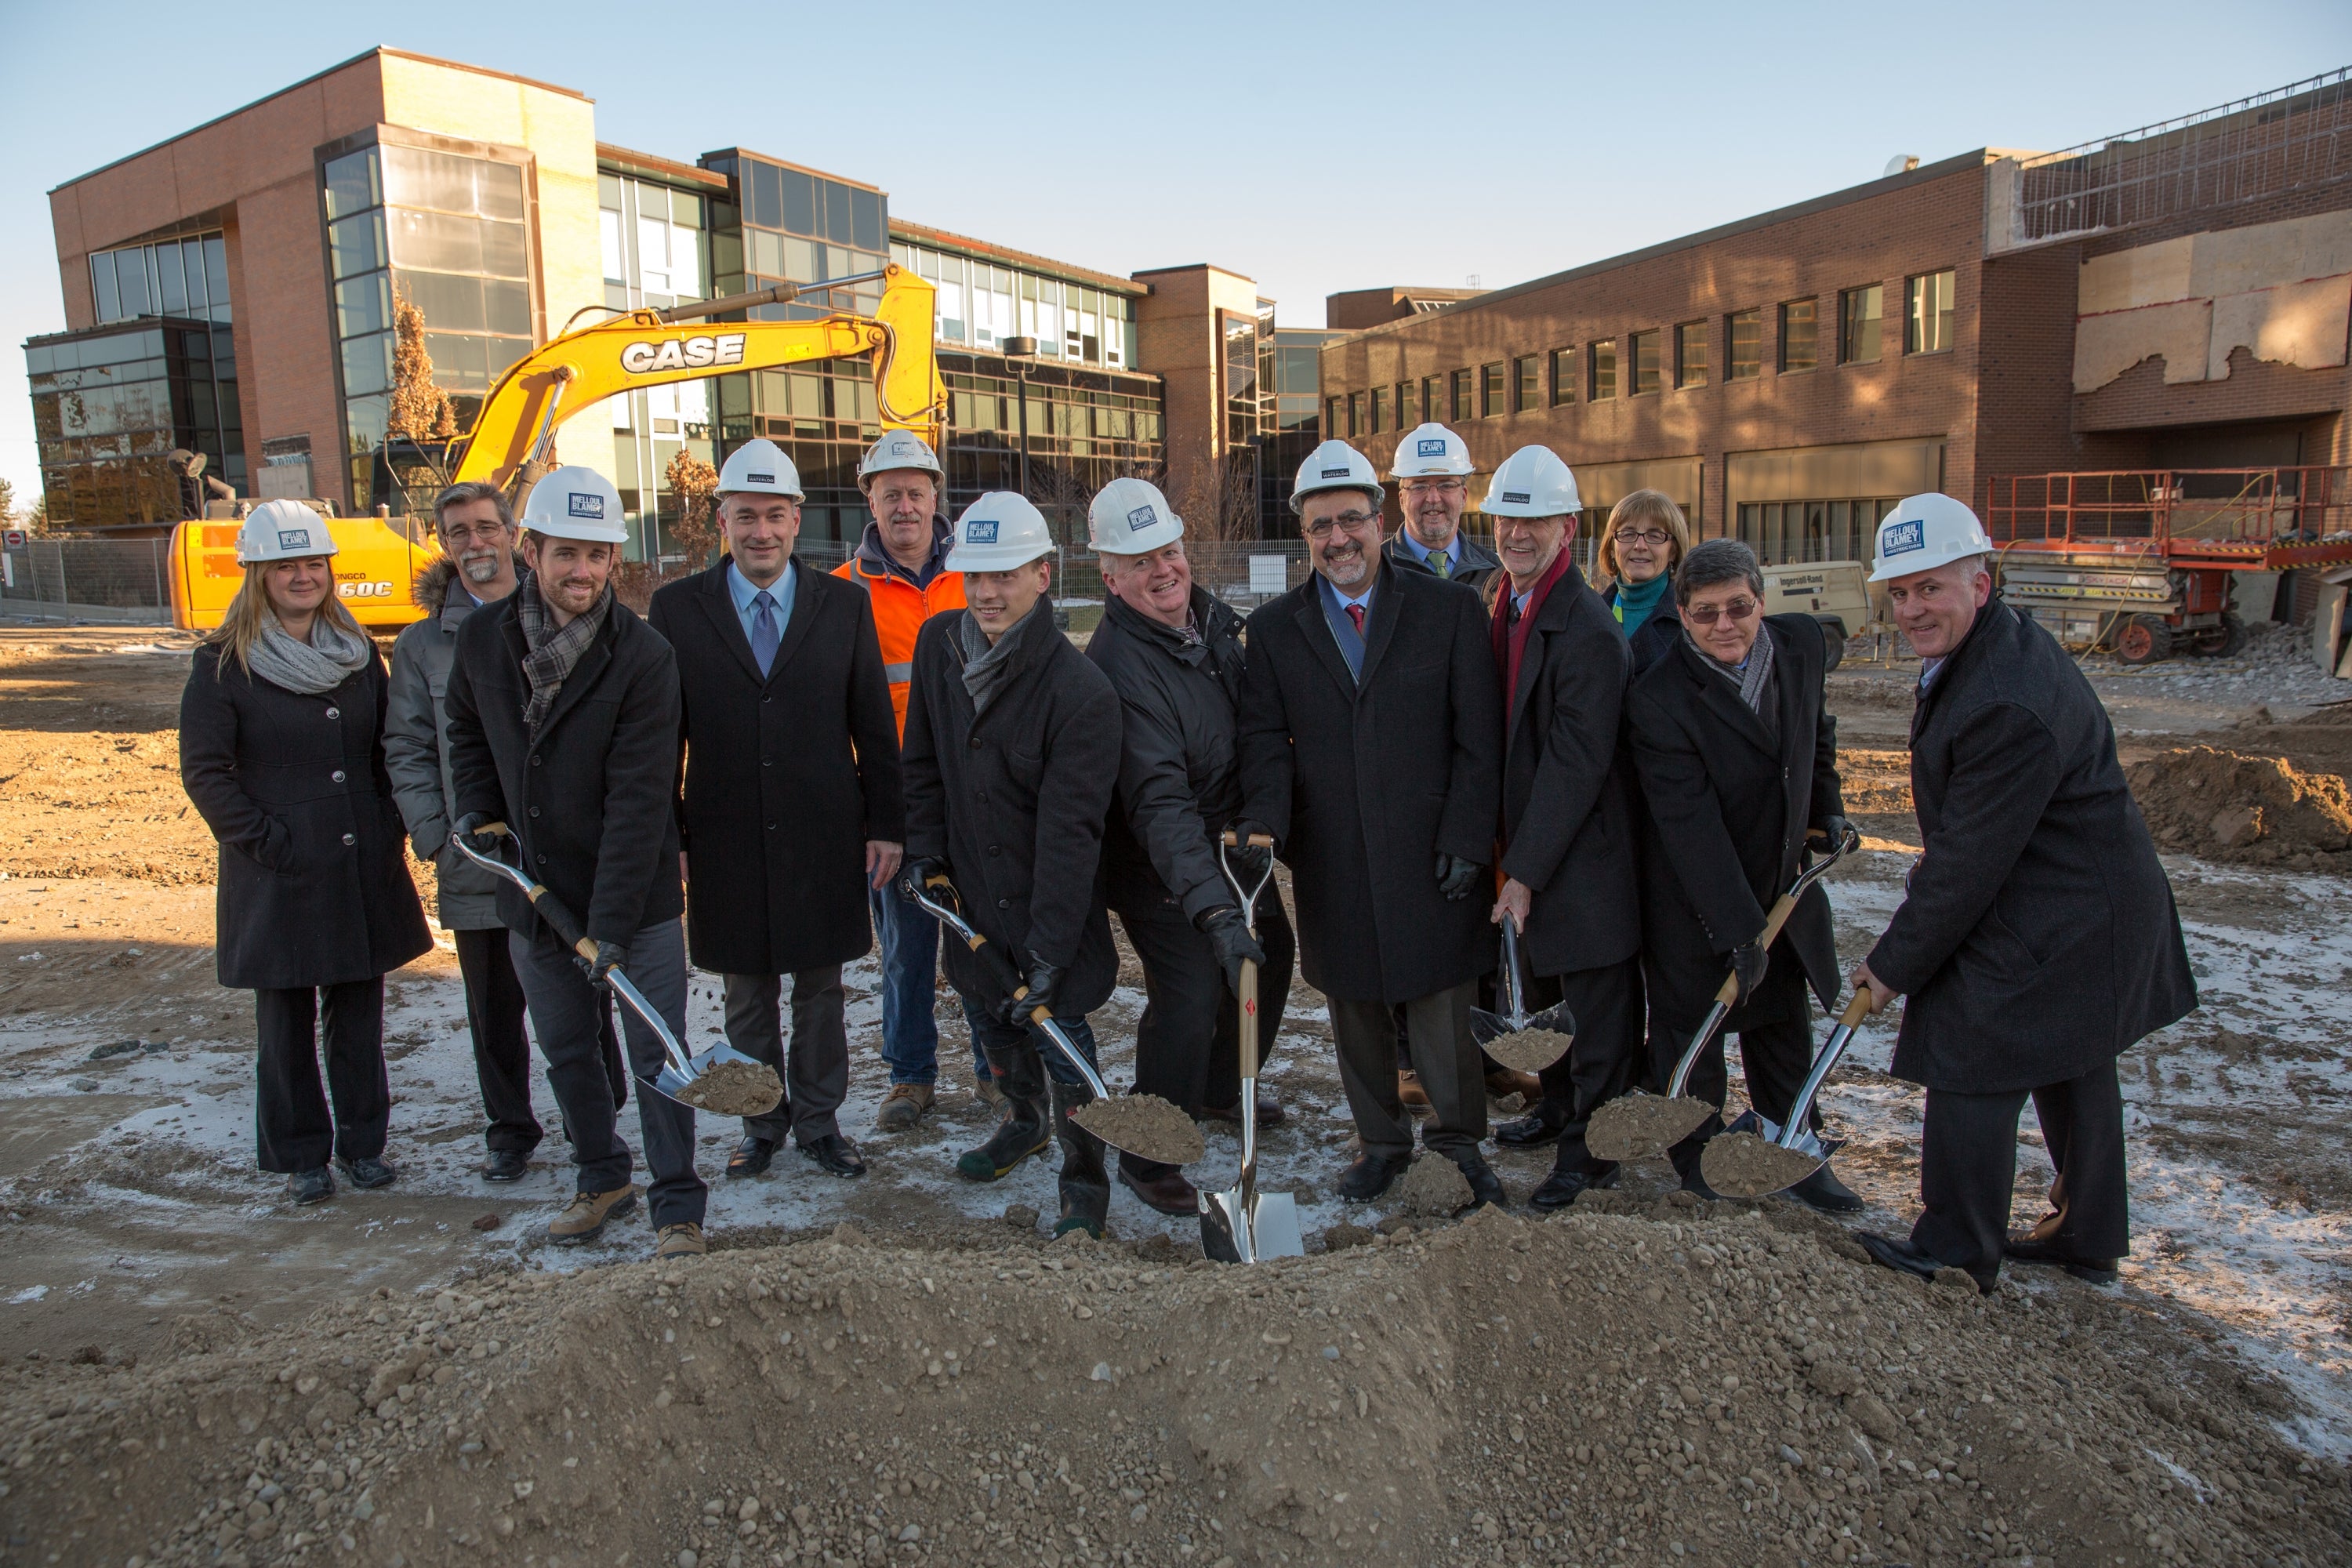 Employees of Melloul-Blamey Construction breaking ground alongside UWaterloo Administration and staff members.